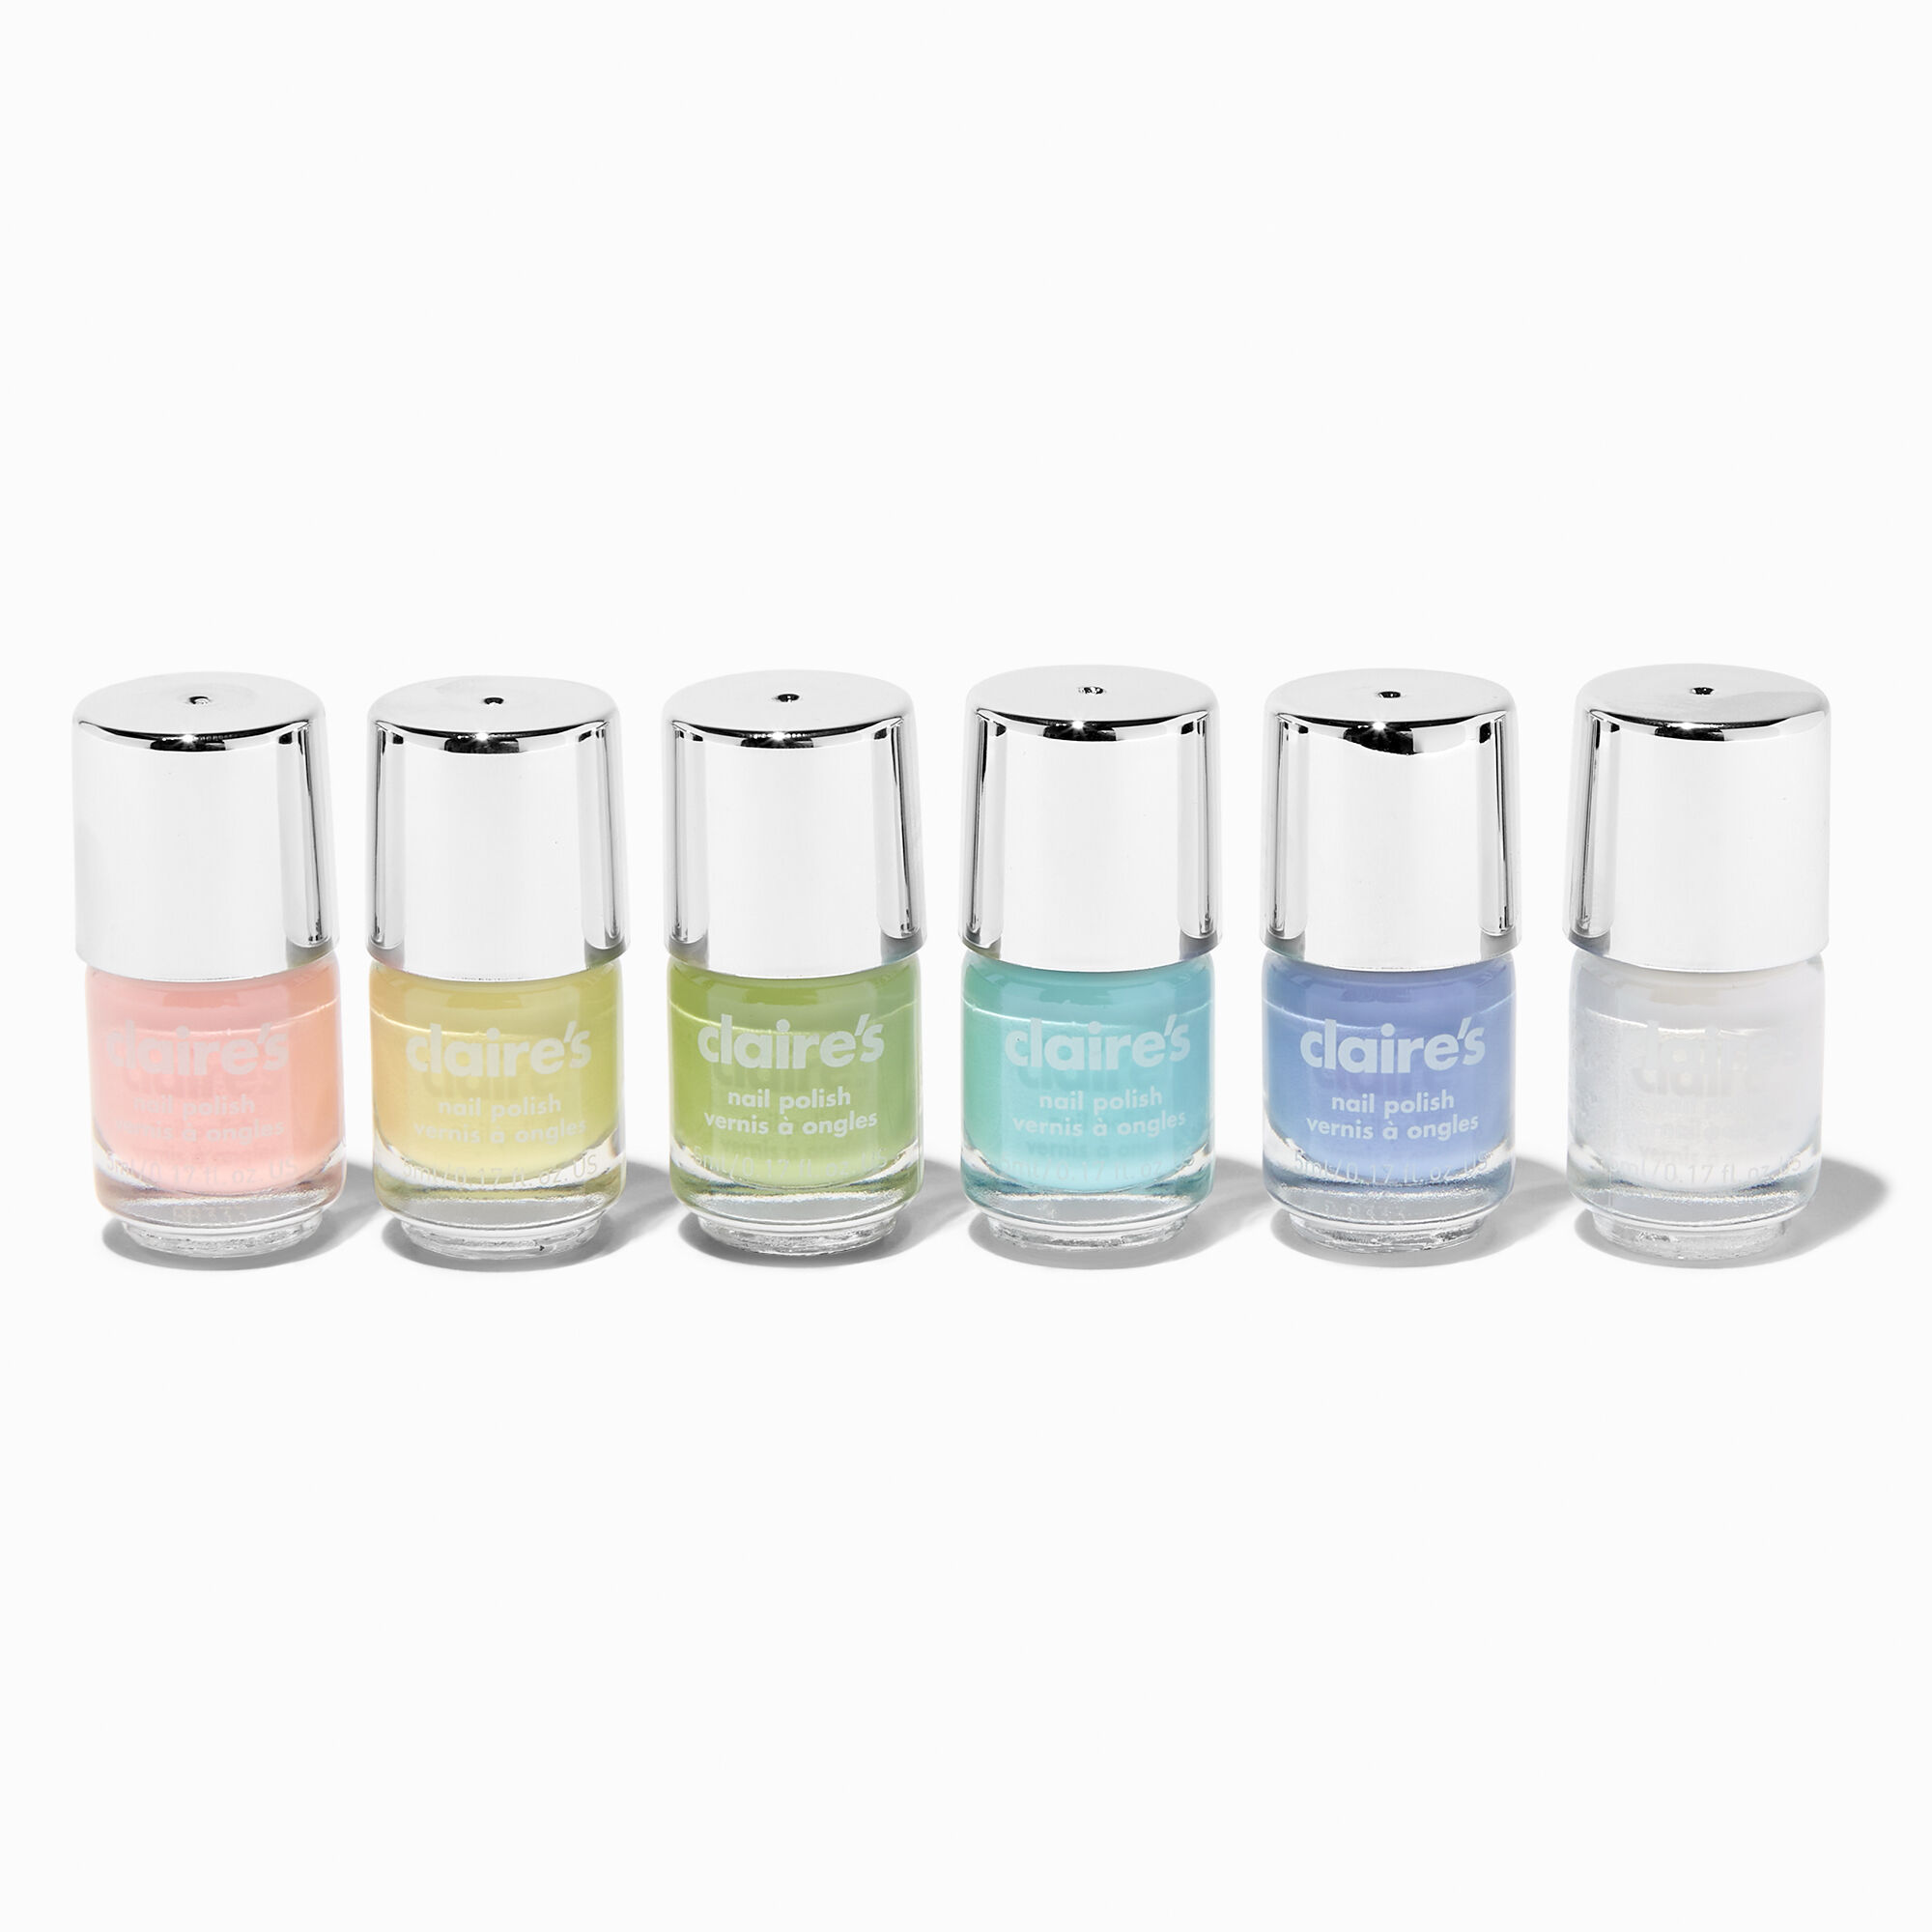 Eternal White French Nail Polish Set (Et Voila) - Clear Nail Polish Set For  Girls - Lasting & Quick Dry Pastel Nail Polish Set For Women For Home Diy -  Imported Products